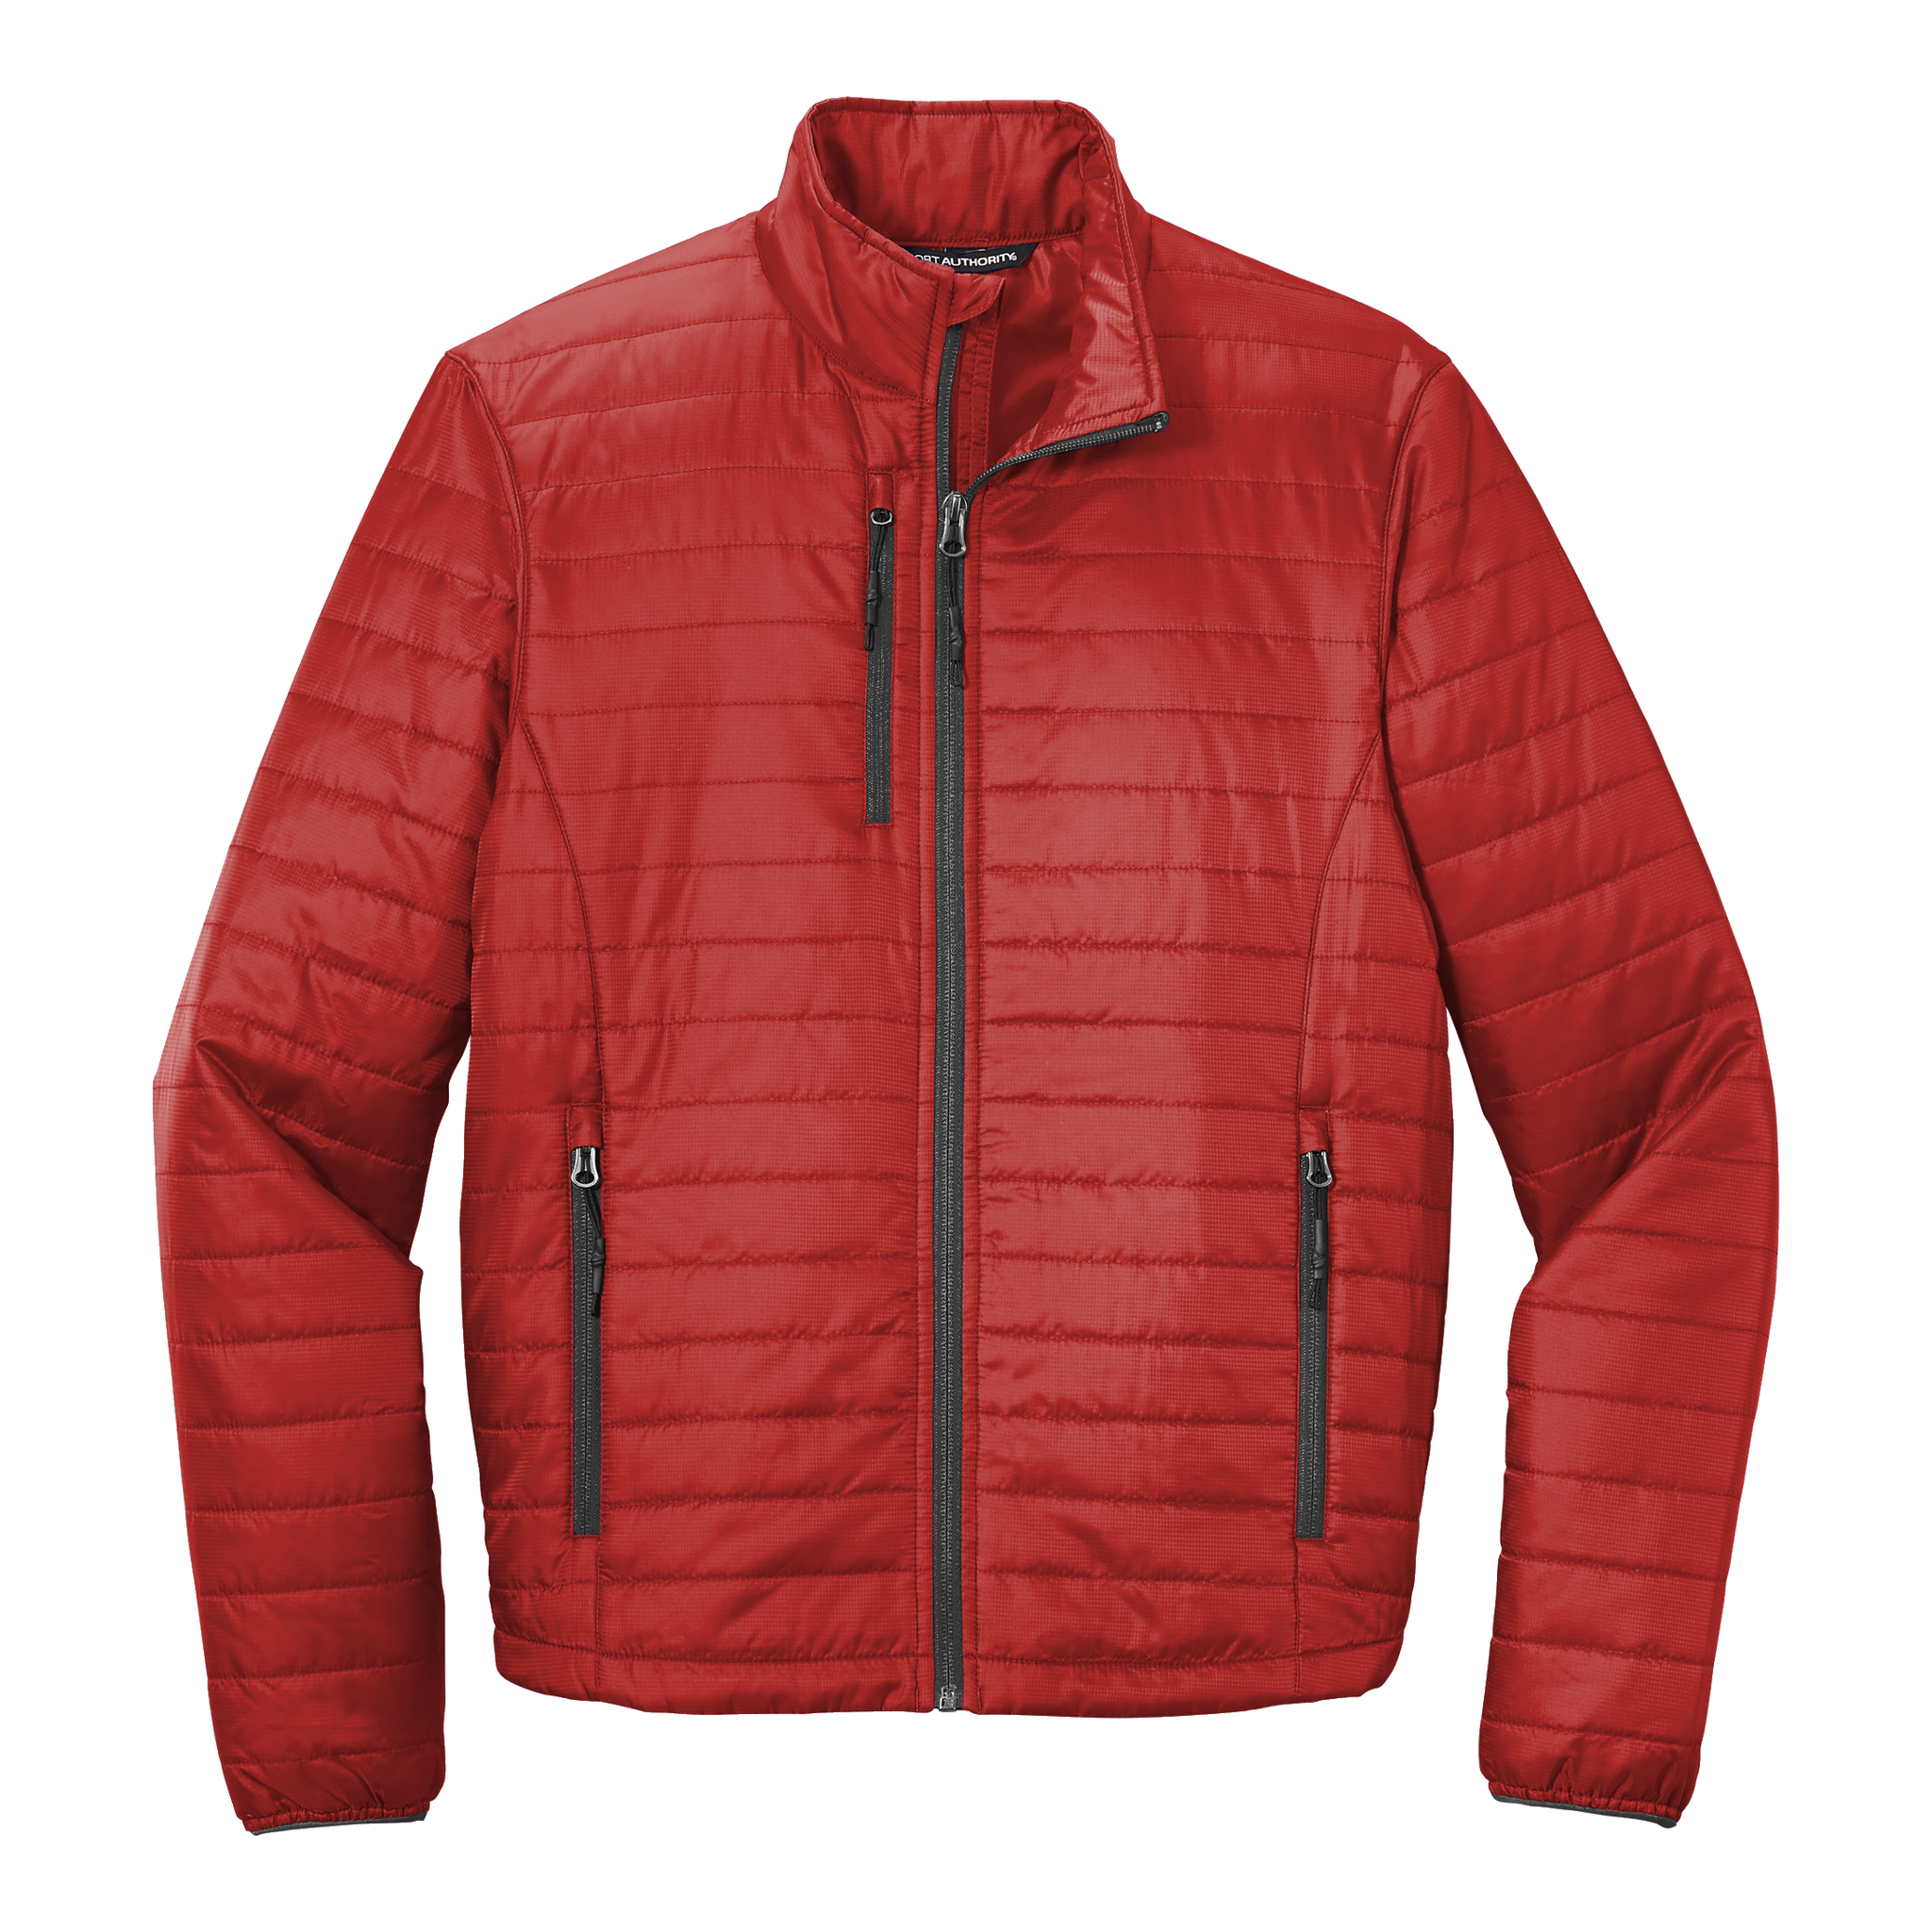 A2064M Mens Packable Puffy Jacket